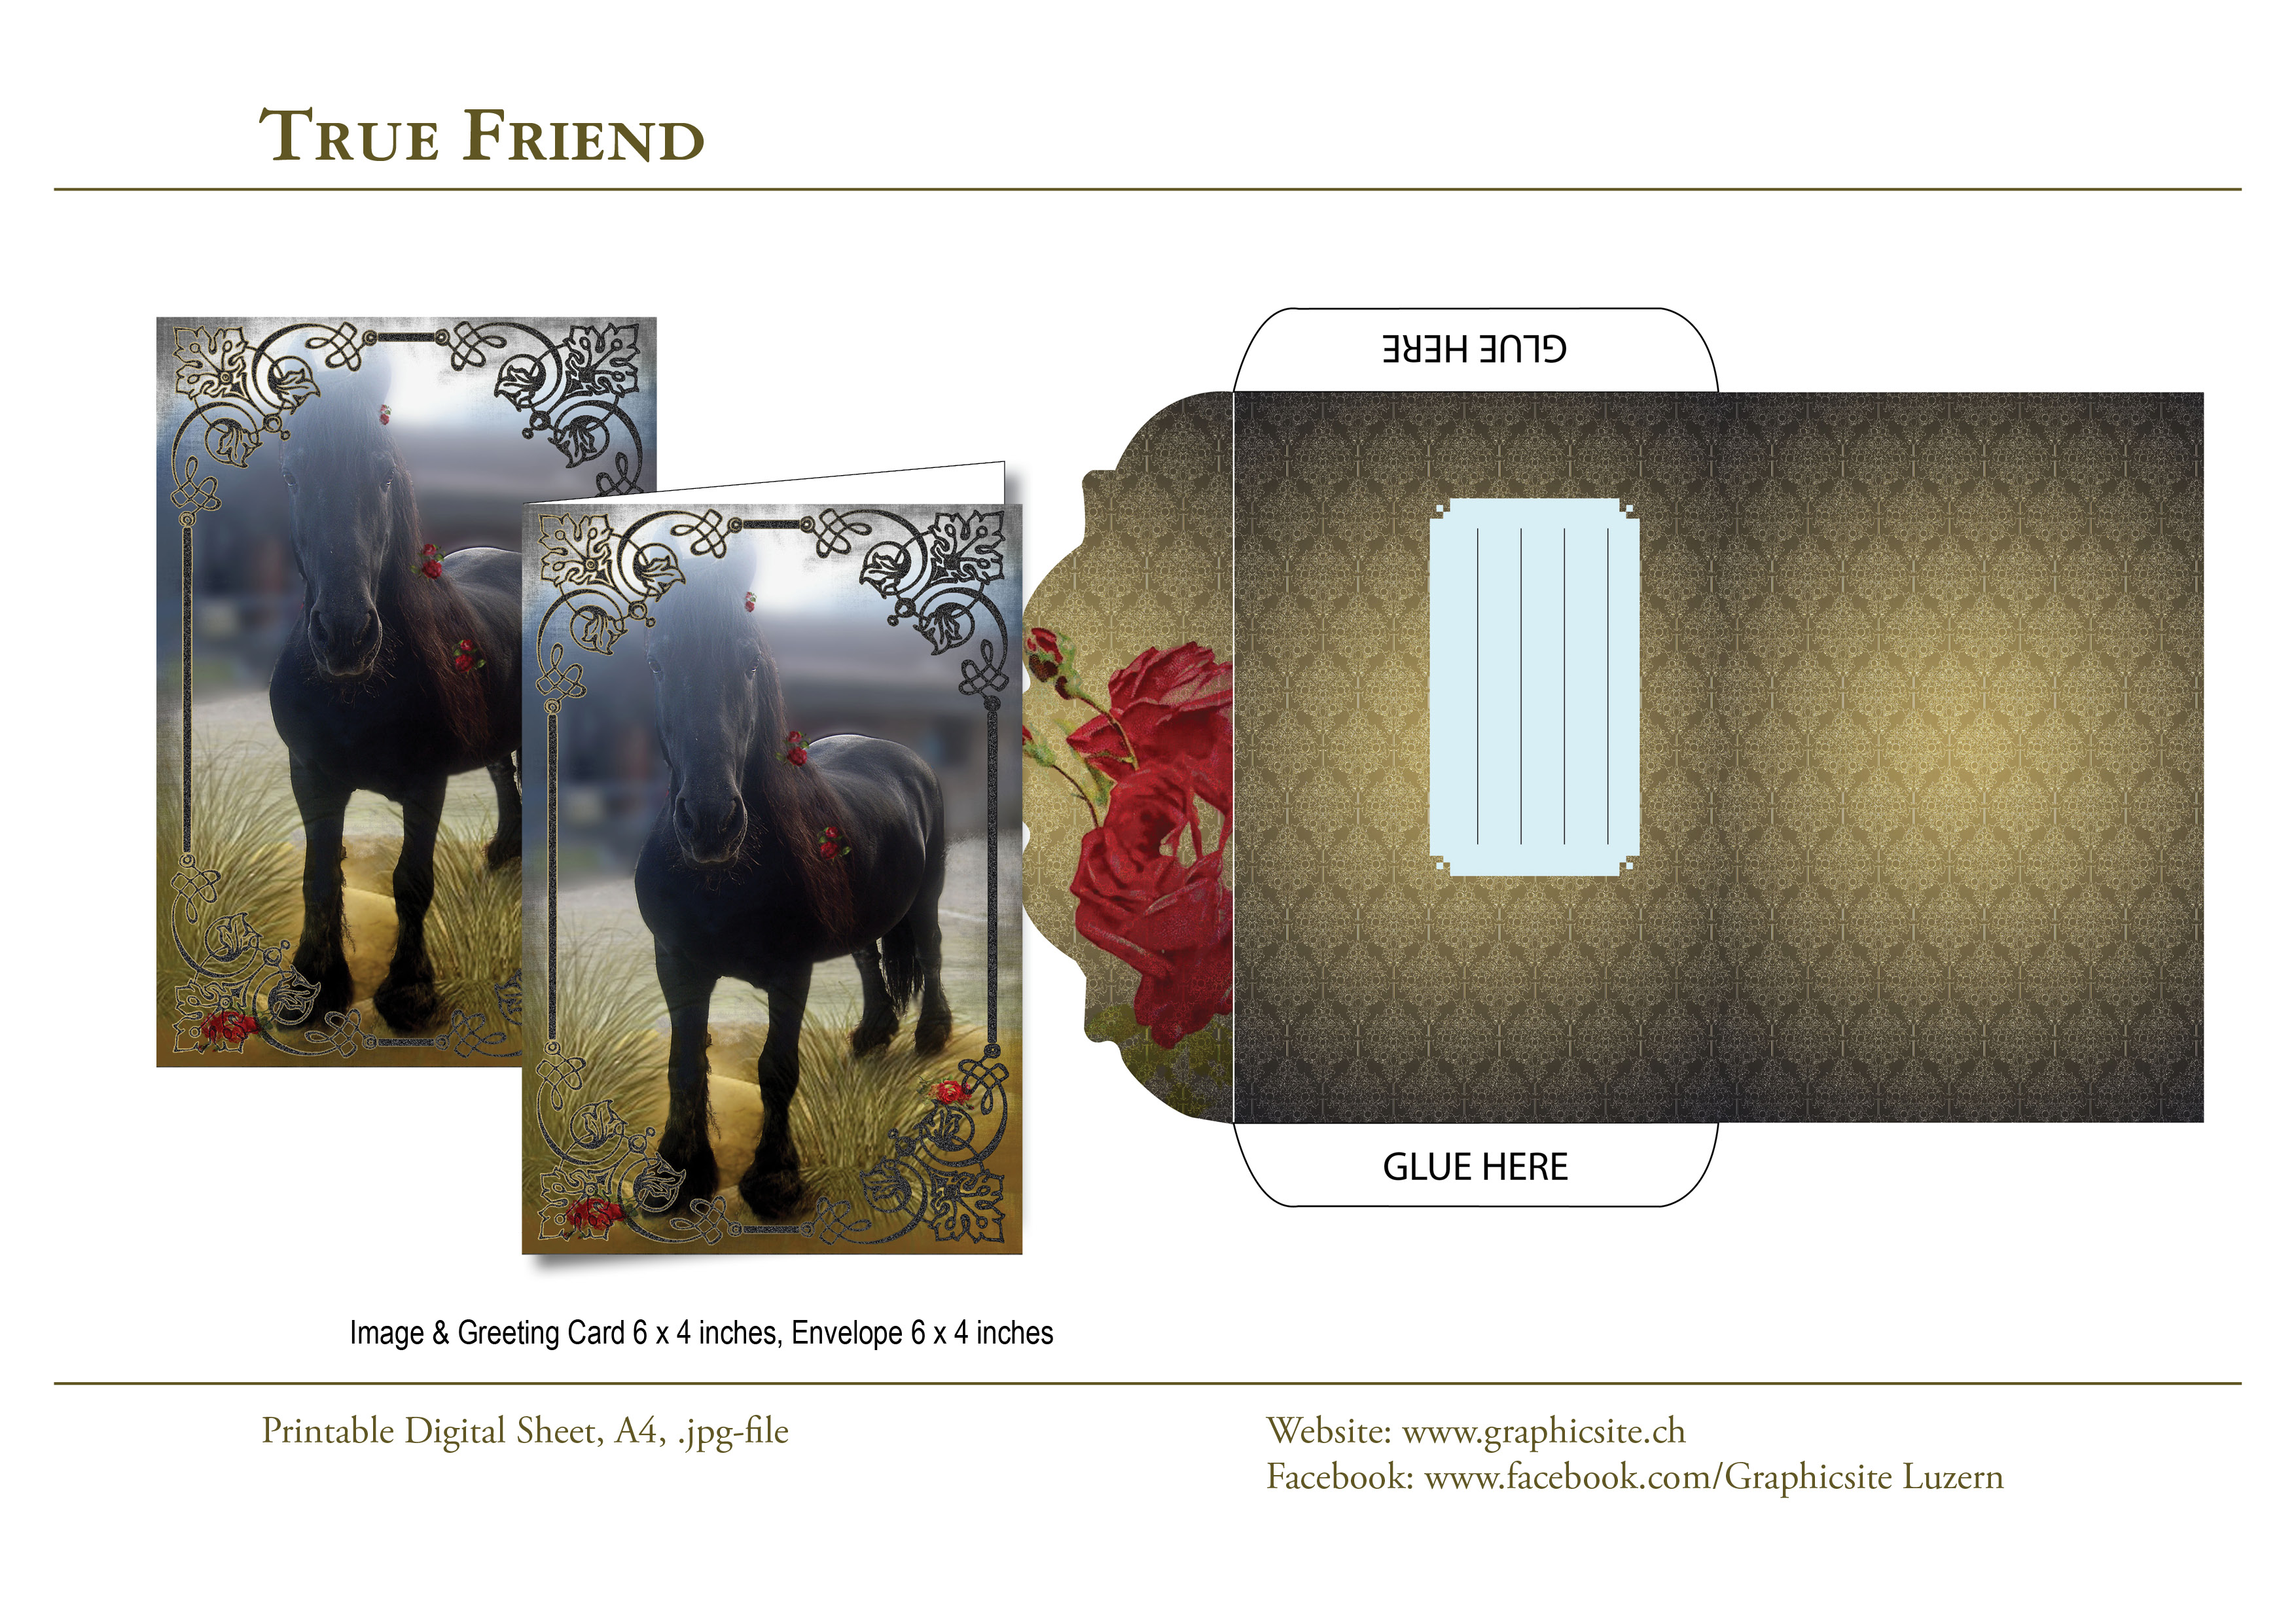 Printable Digital Sheets - 6x4 Collections - TrueFriend - #horse, #friesian, #cards, #greetingcards